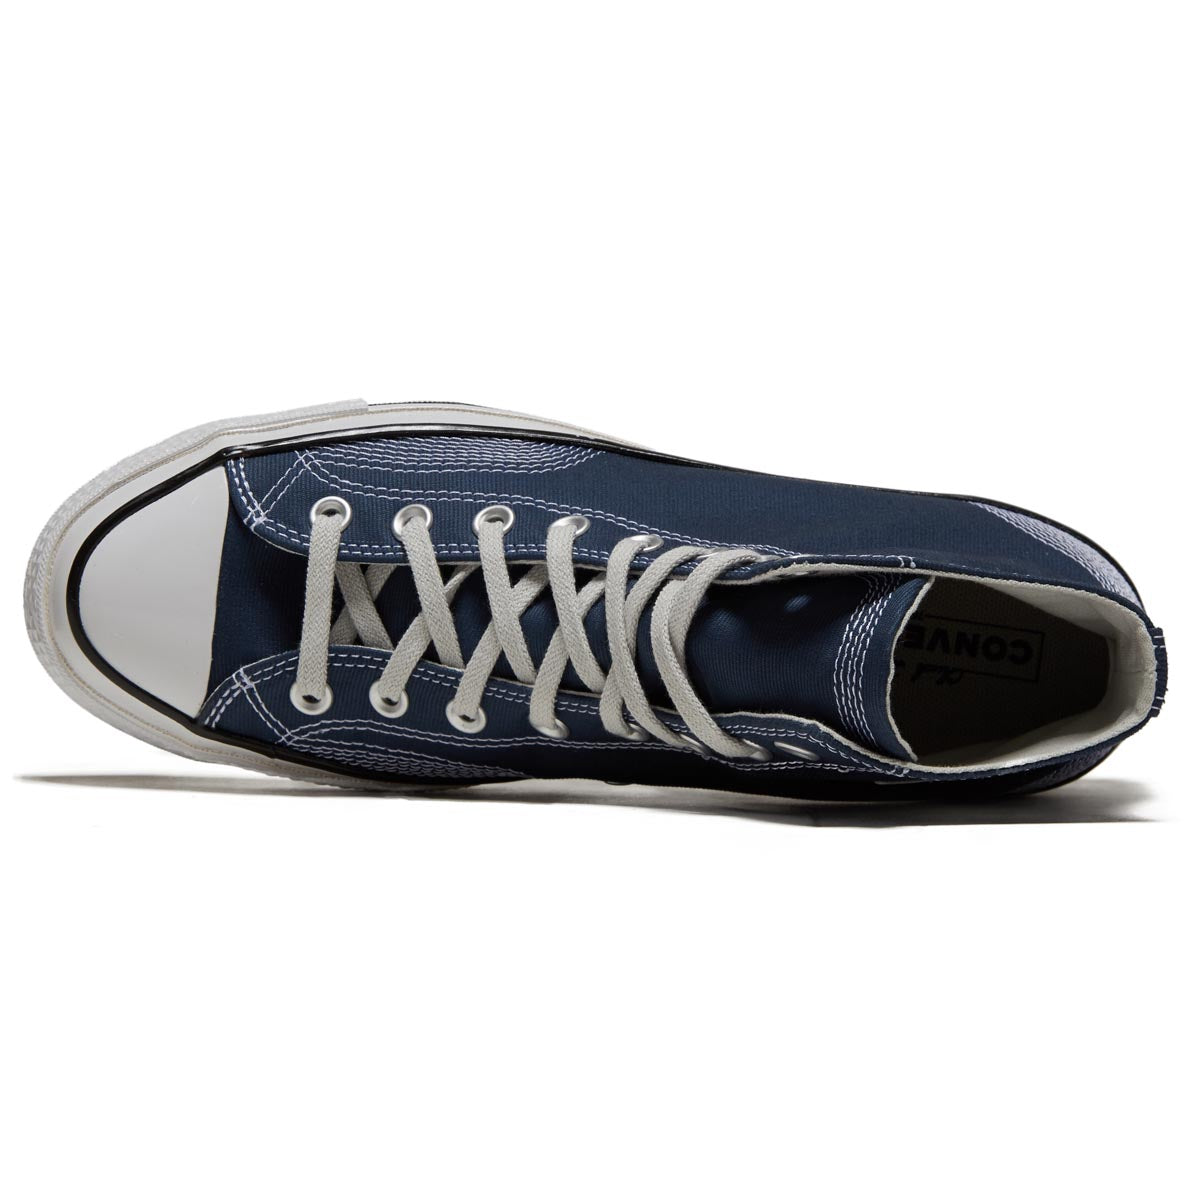 Converse Chuck 70 Hi Shoes - Navy/Fossilized/Fossilized image 3